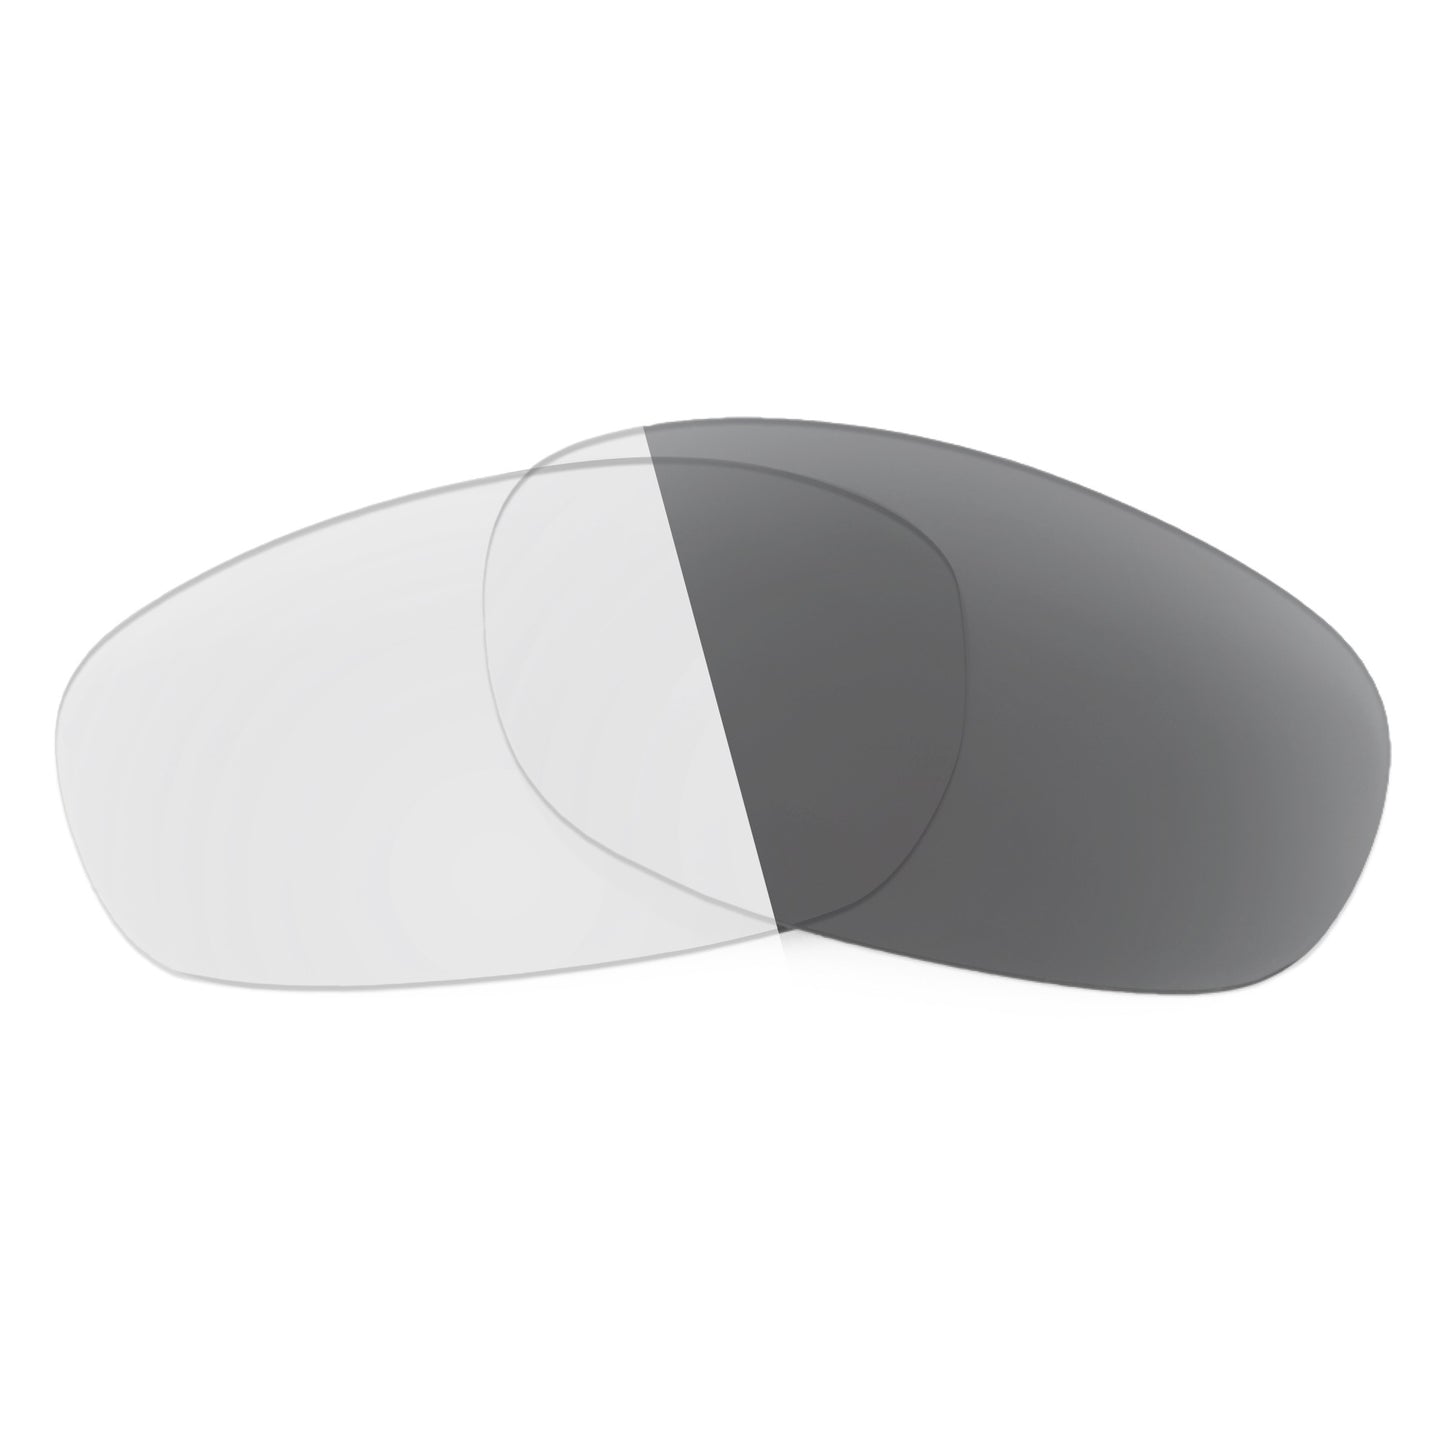 Revant replacement lenses for Ray-Ban RB3273 60mm Non-Polarized Adapt Gray Photochromic